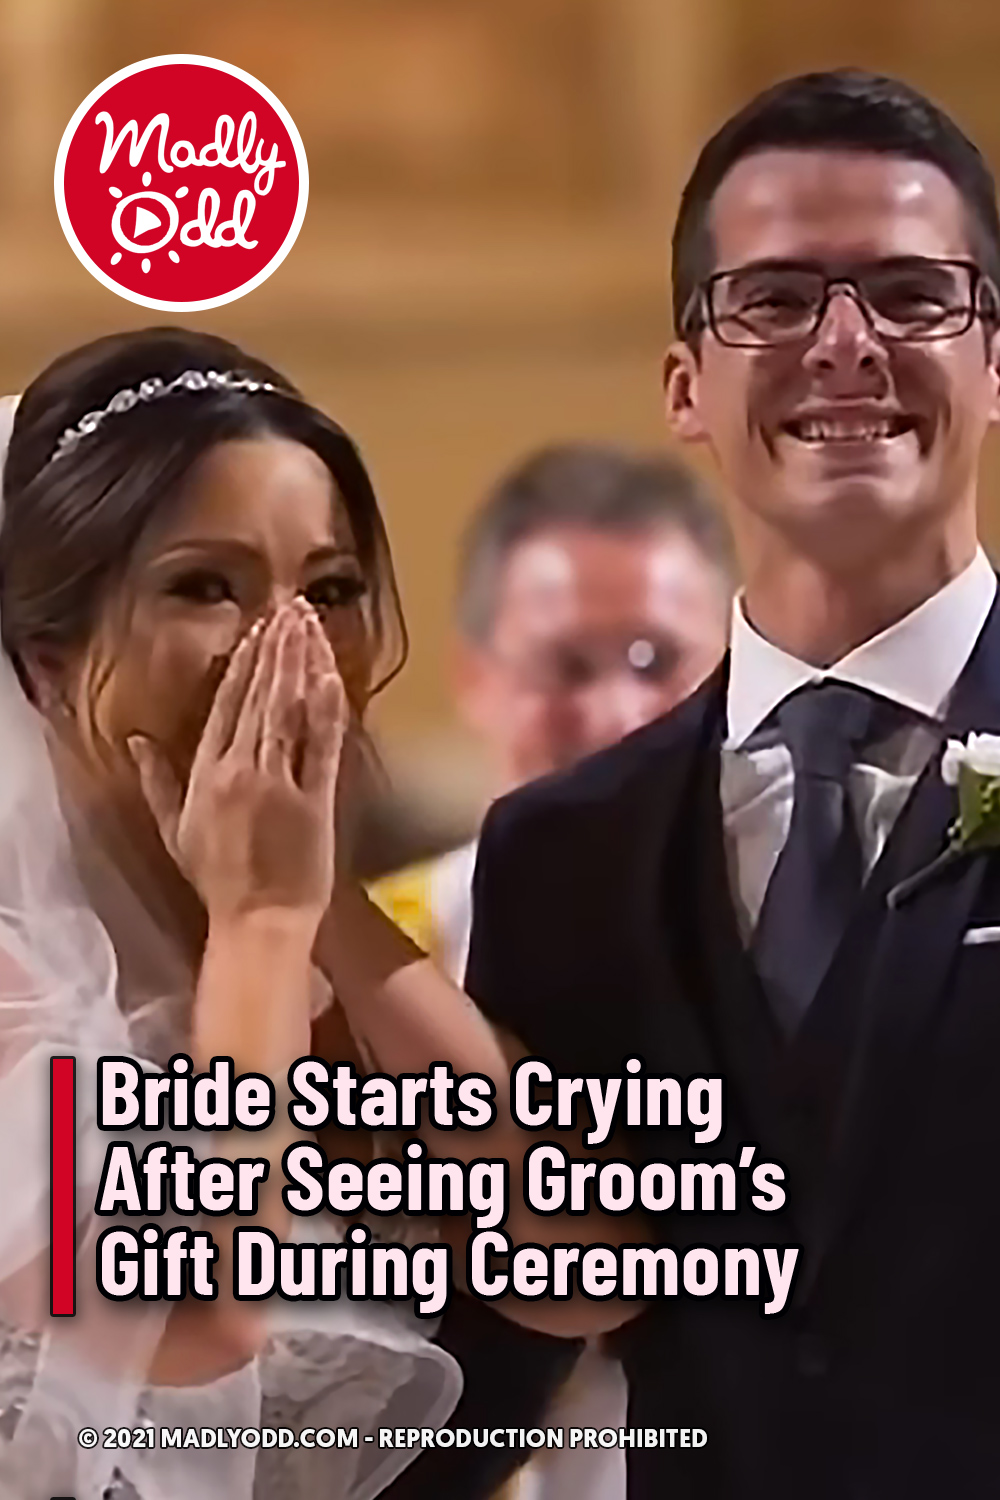 Bride Starts Crying After Seeing Groom’s Gift During Ceremony